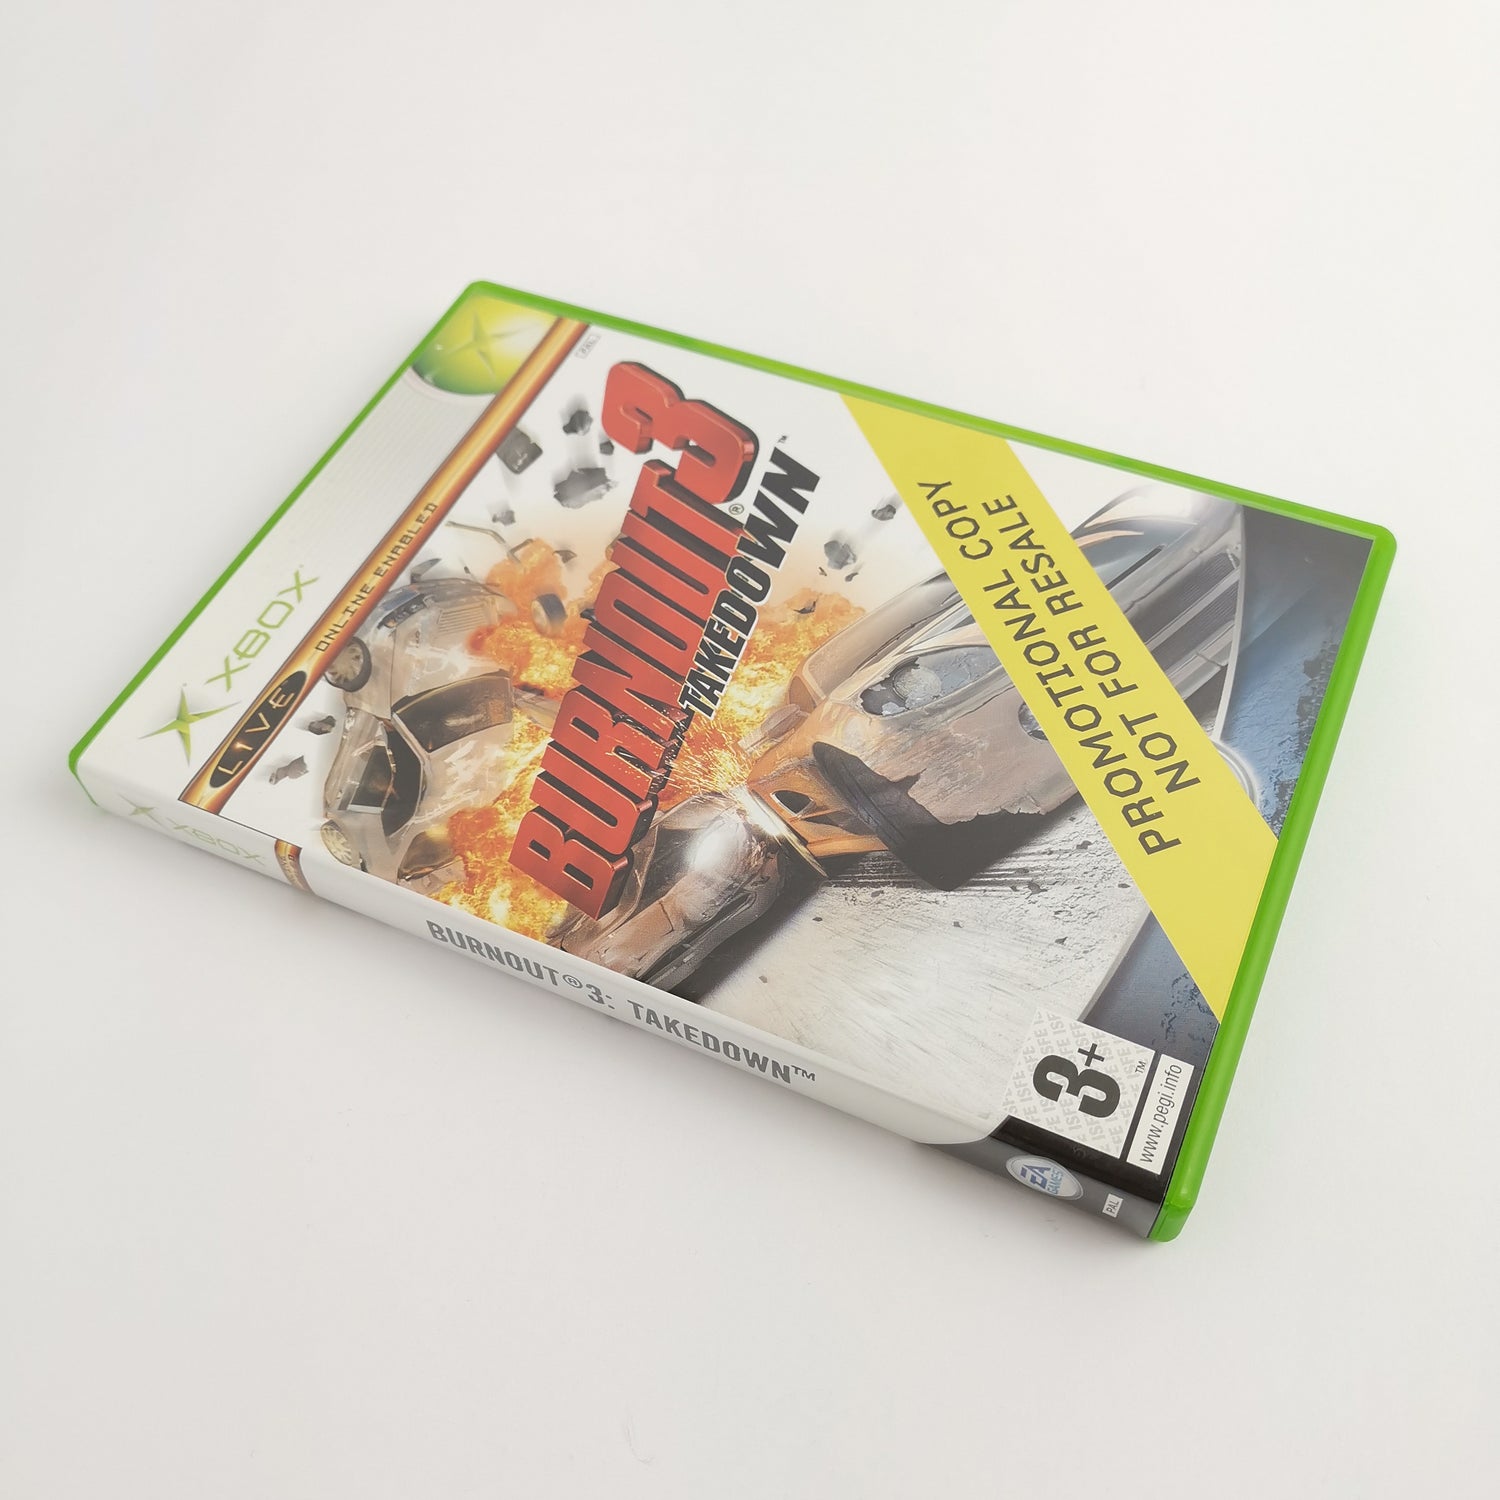 Microsoft Xbox Classic Game Burnout 3 Takedown Promotional Copy Not for Resale